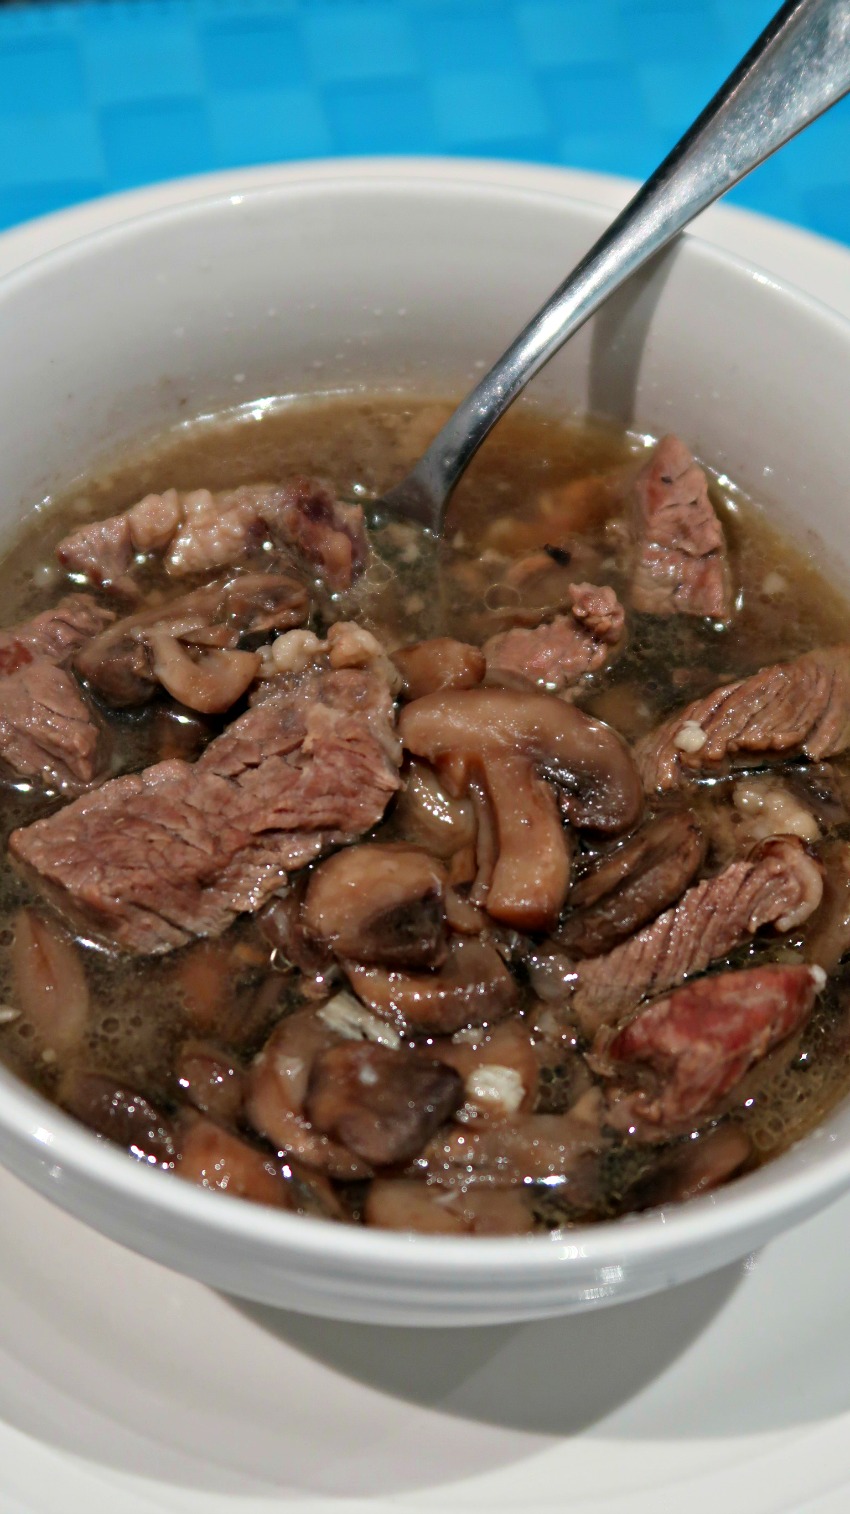 Beef-and-Mushroom-Soup-Recipe-Low-carb-keto-diet-soup-recipe-plus-video-tutorial.